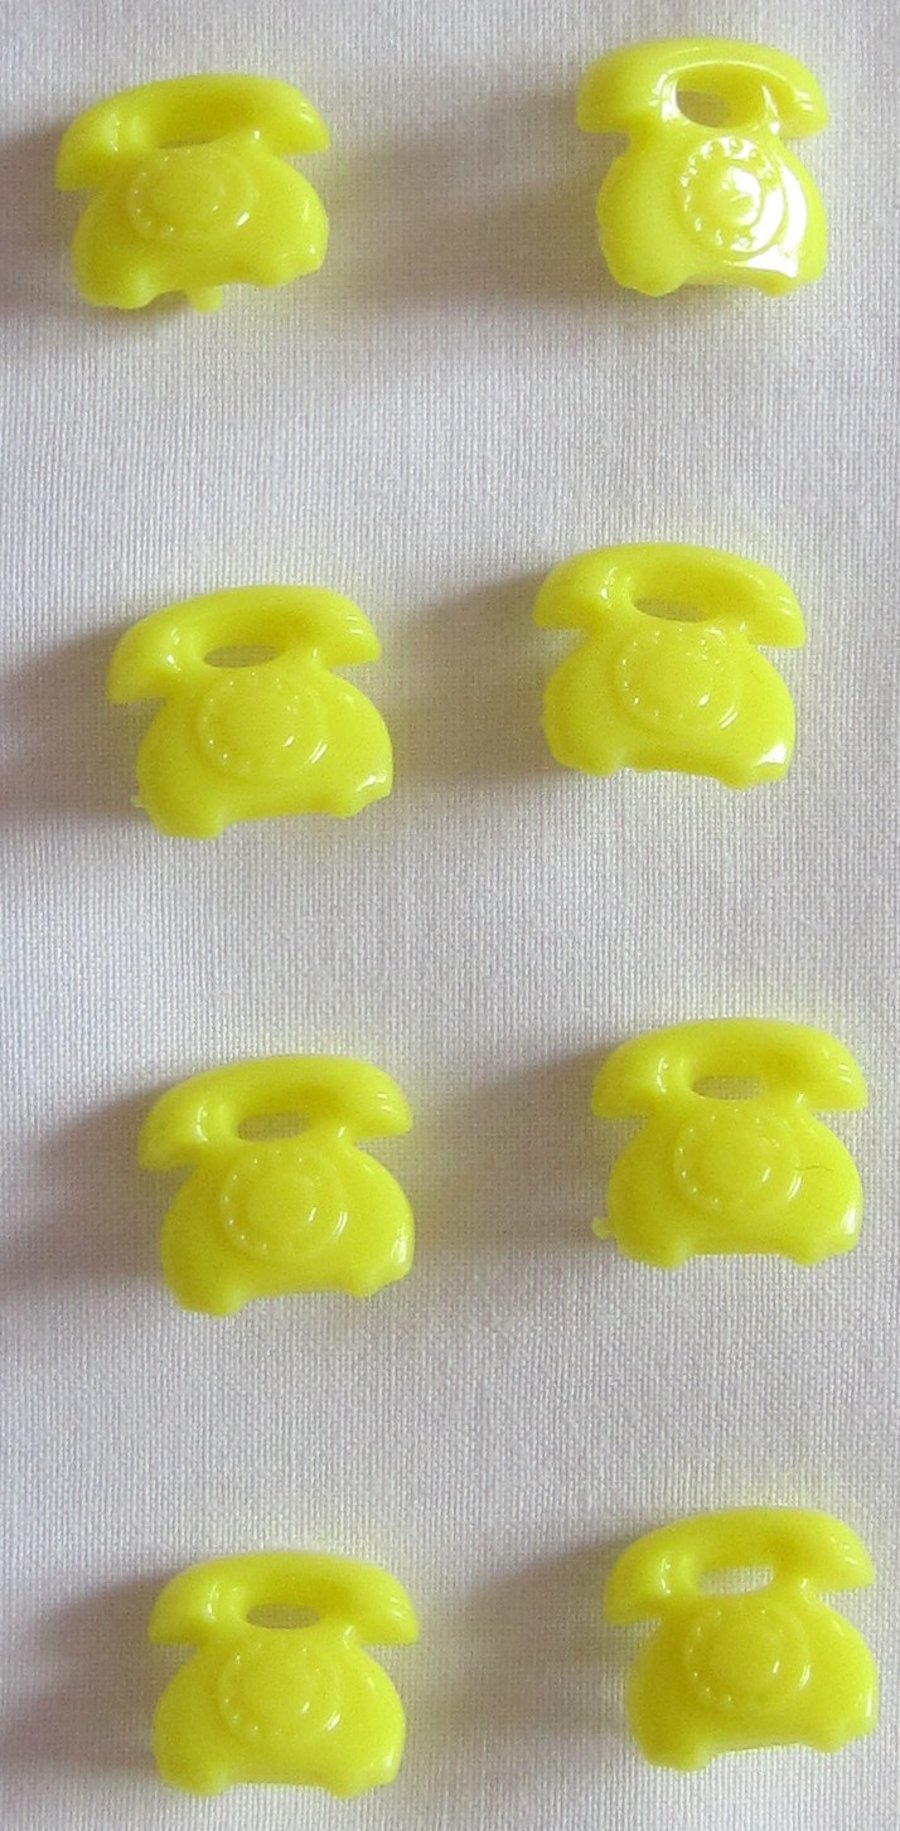 10 Yellow Telephone Buttons